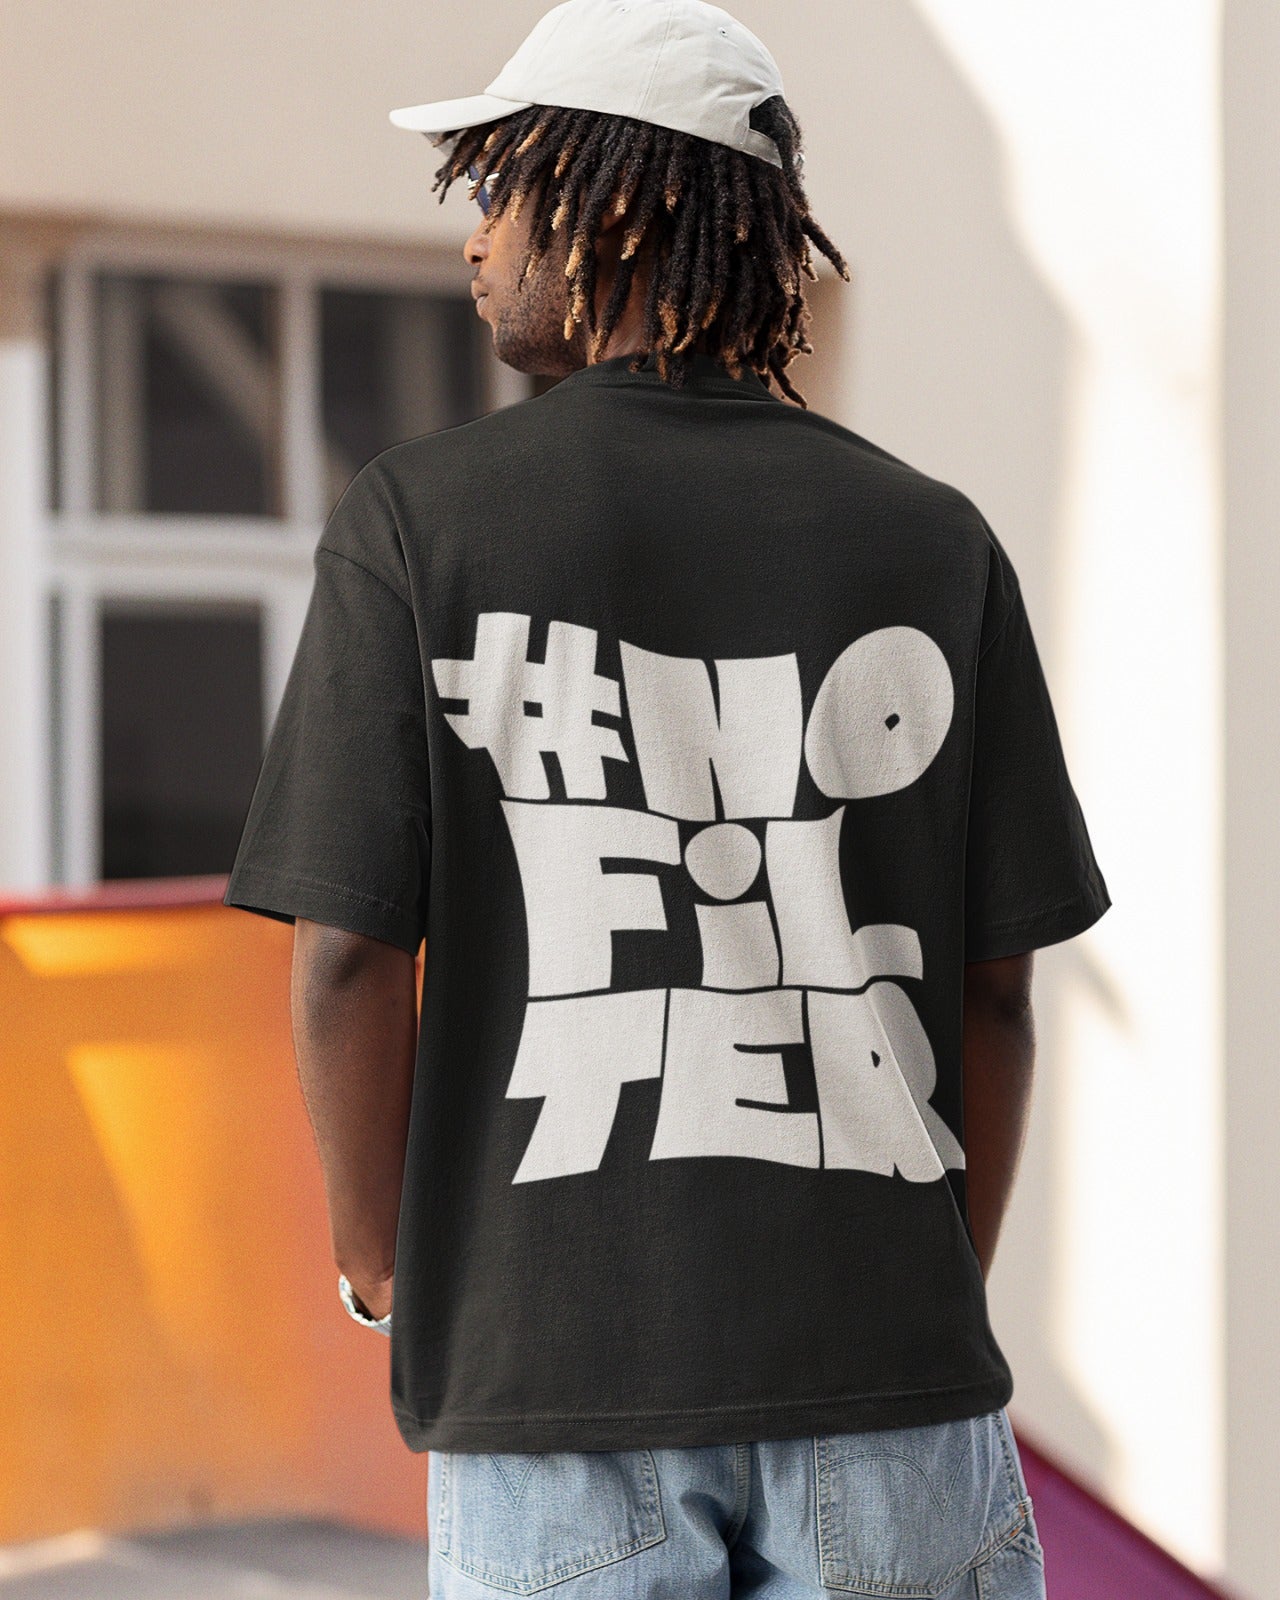 Elevate your style with our Premium Black Oversized T-Shirt, featuring a bold and impactful statement on the back - #NOFILTER. In big, white letters that cover the entire back, this tee is a celebration of authenticity and self-expression. Crafted with attention to detail, it's not just an accessory; it's a declaration of self-confidence. Wear it proudly and let your true self shine. Order yours today and make a statement with unwavering confidence.